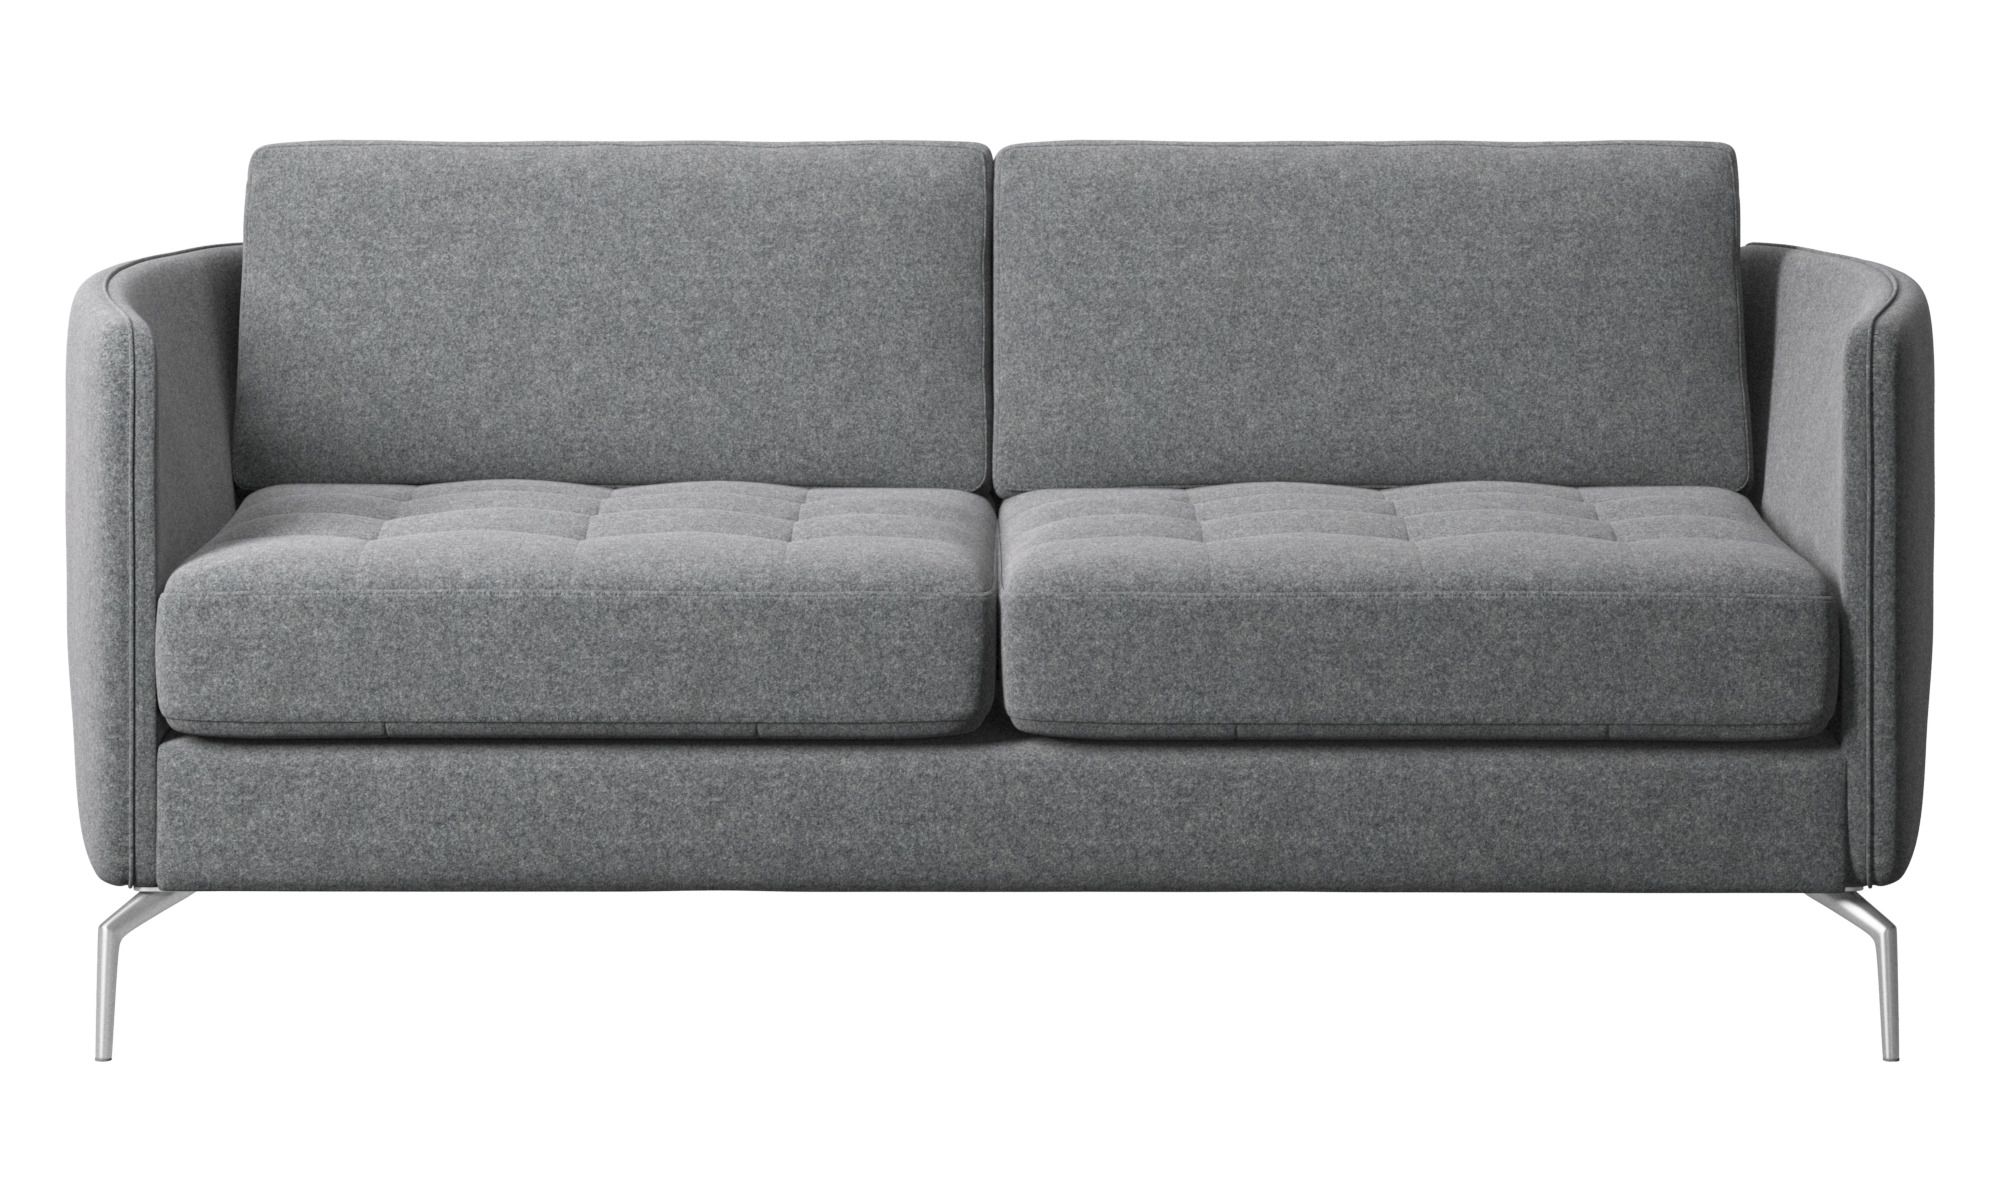 Tufted Blue Suede 3 Seat Sofa Loveseat Blue Couch Blue Within 3Pc Polyfiber Sectional Sofas With Nail Head Trim Blue/Gray (View 5 of 15)